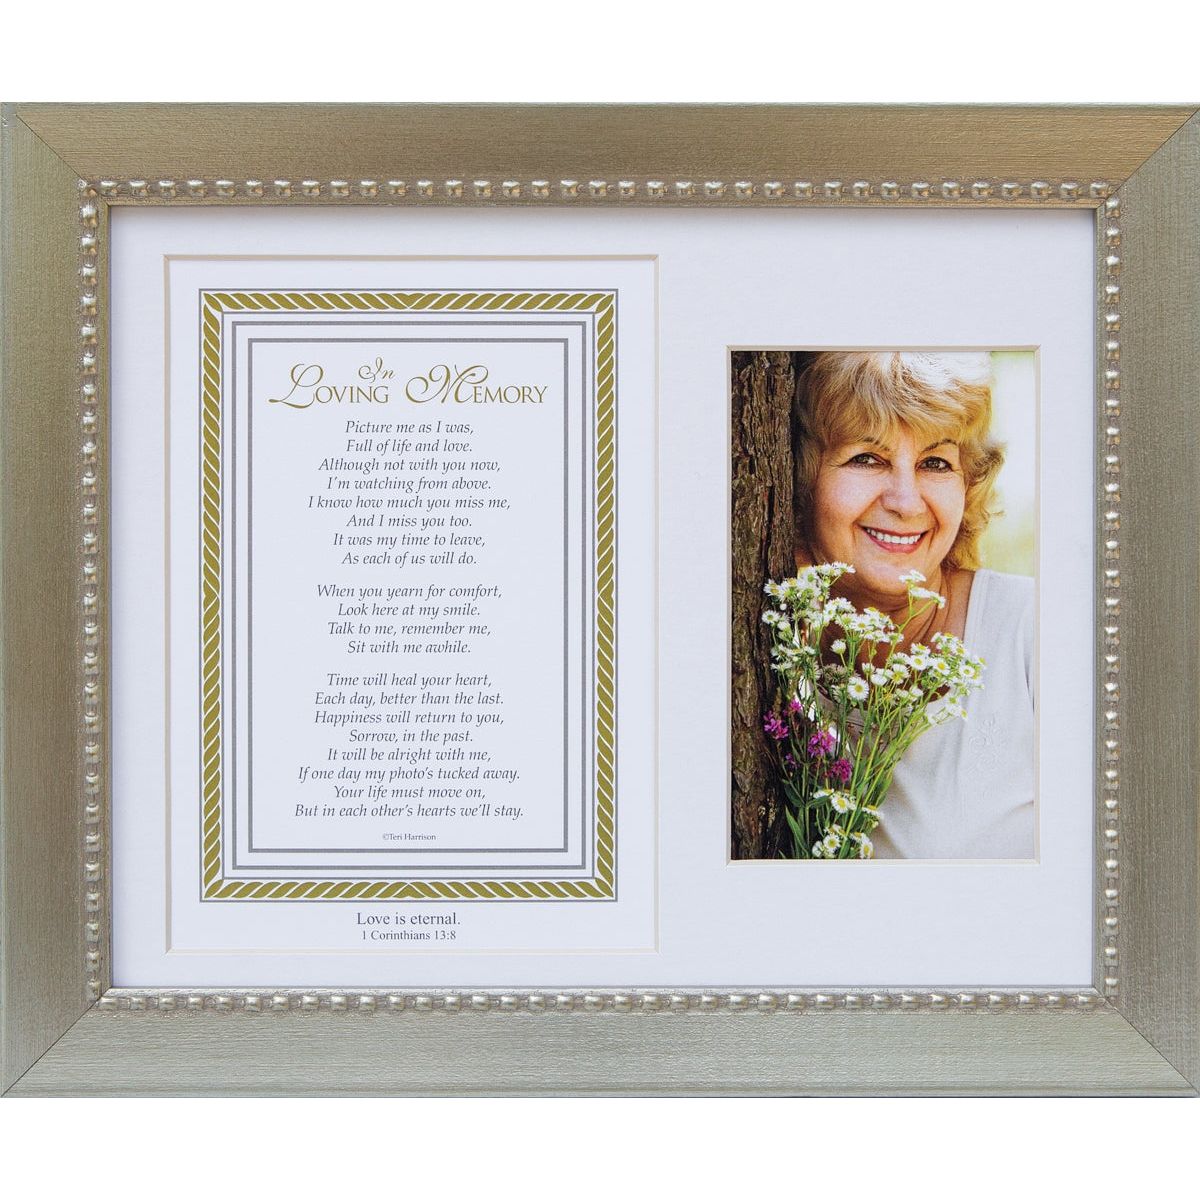 8x10 silver-toned beaded wood frame with white mat "In Loving Memory" poem with scripture and opening for a photo.